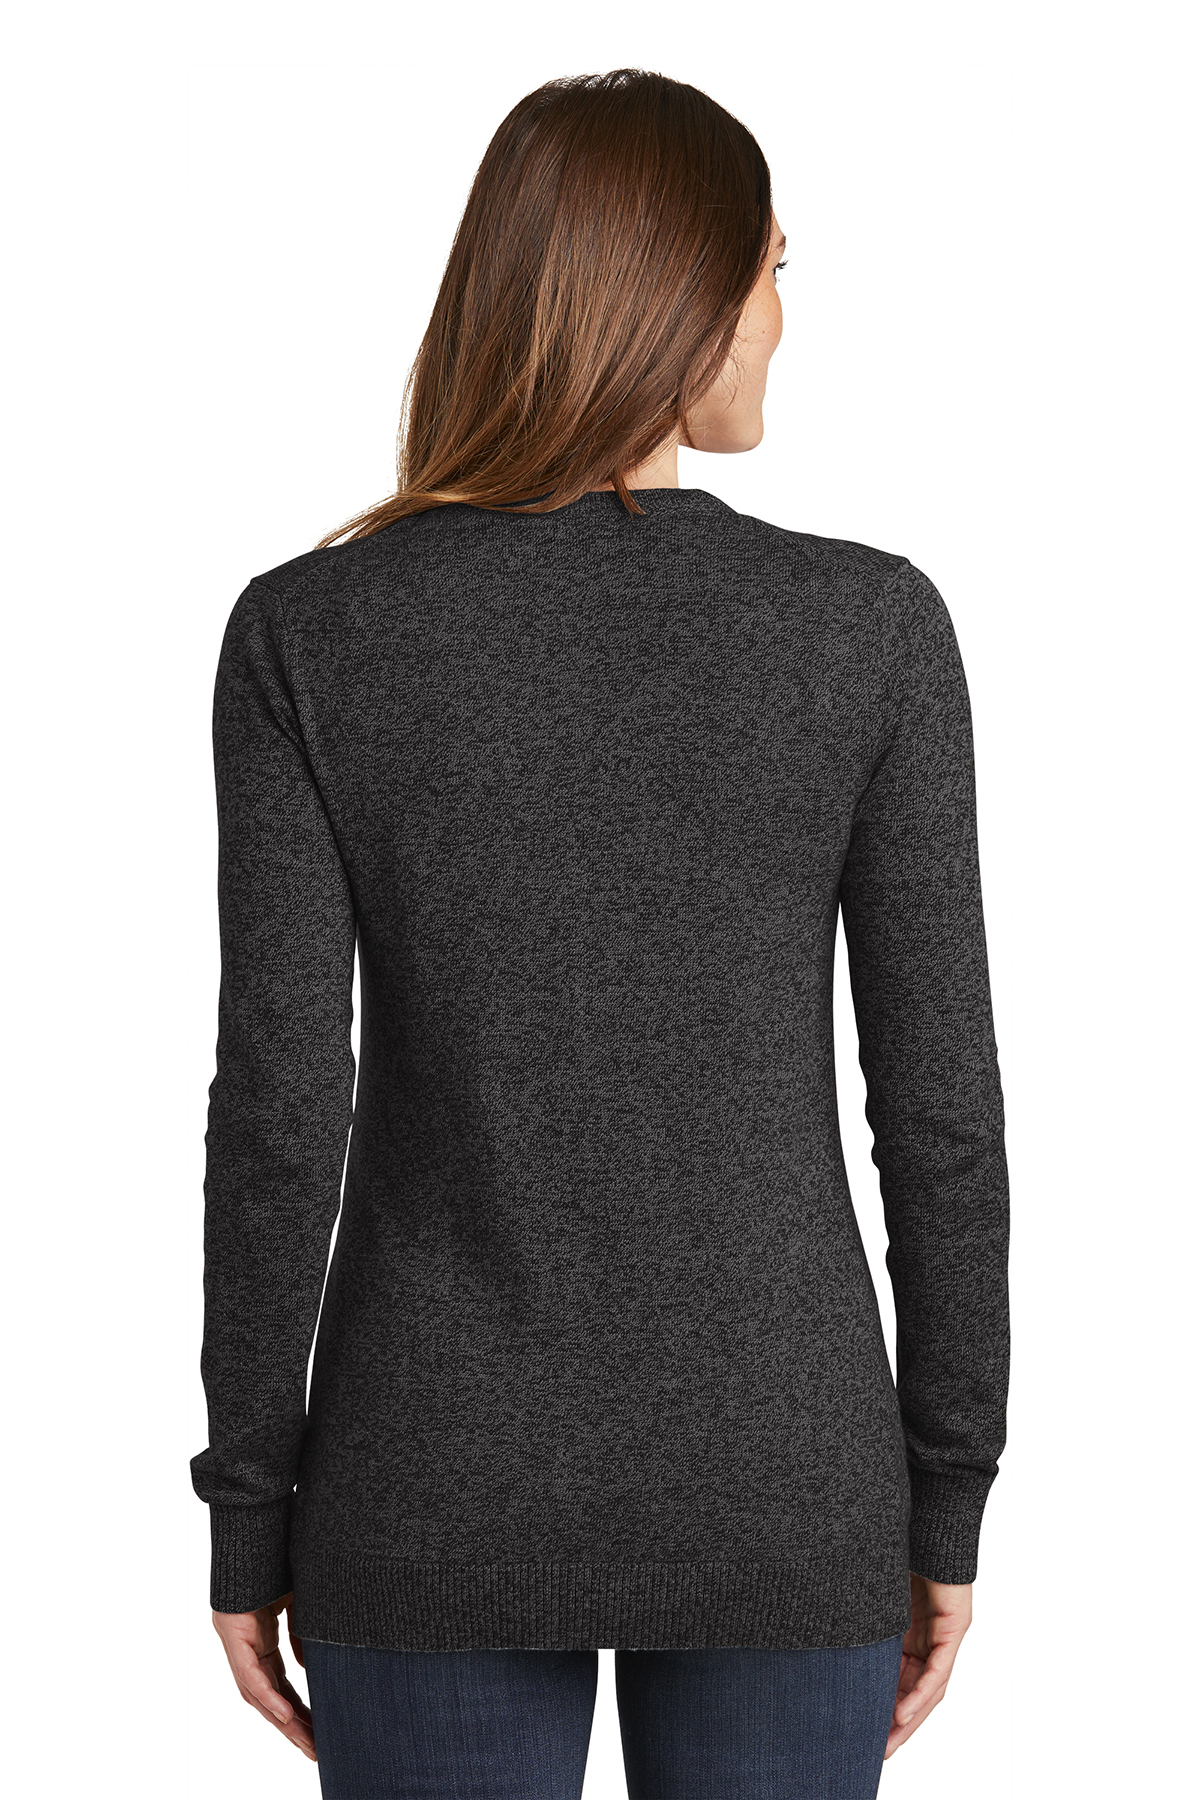 Port Authority Ladies Marled Cardigan Sweater | Product | Company Casuals